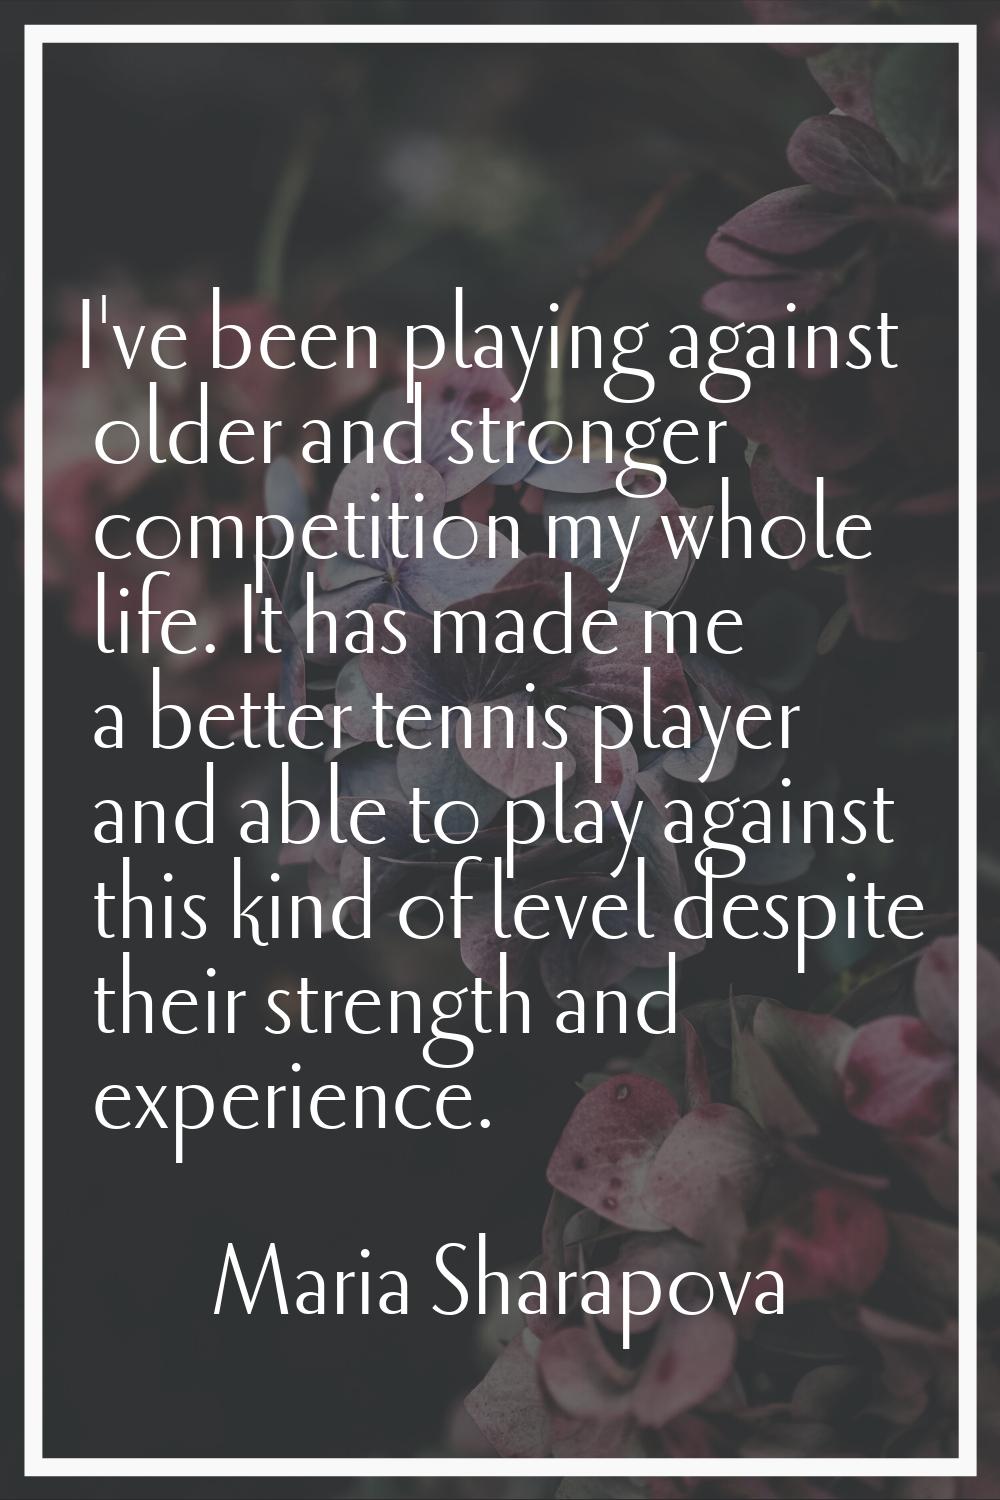 I've been playing against older and stronger competition my whole life. It has made me a better ten